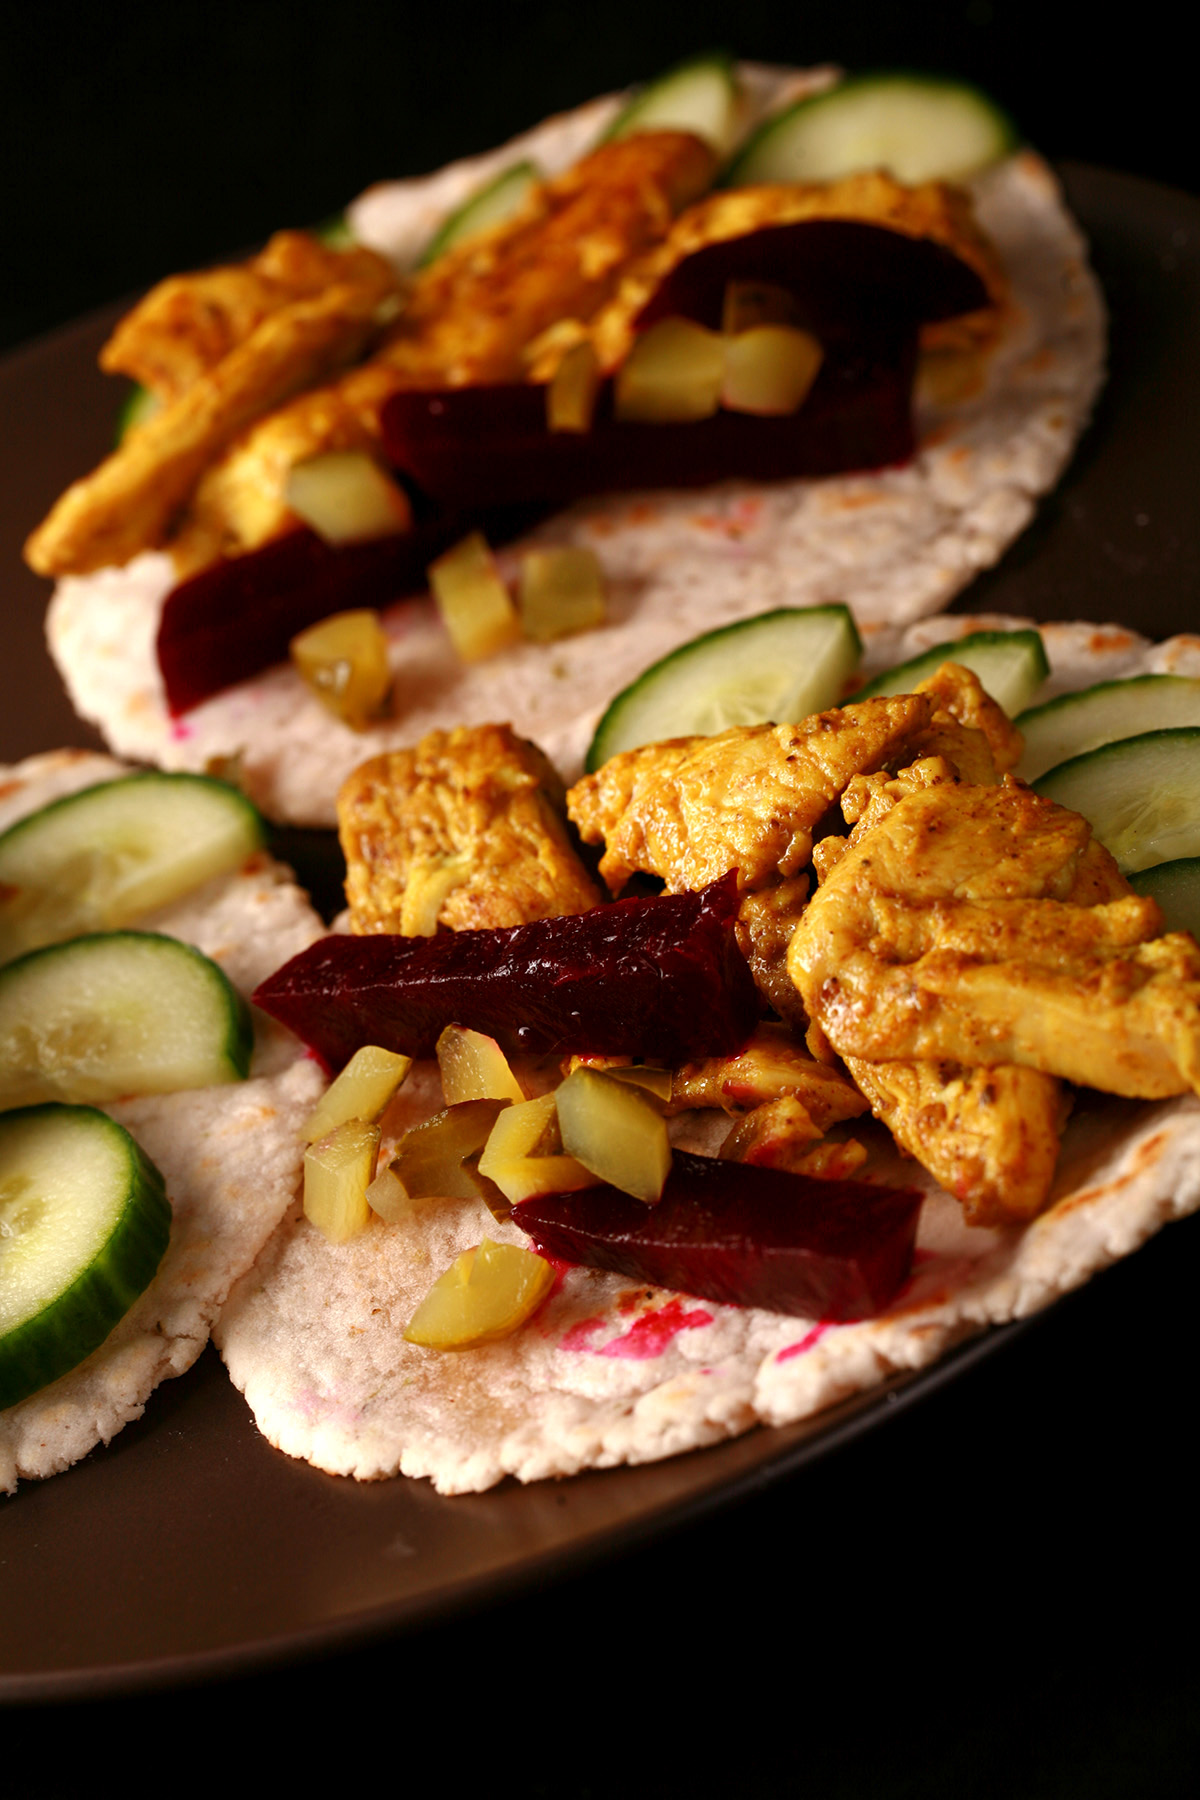 3 cassava tortillas topped with Paleo chicken shawarma, pickled beets, and cucumber slices.